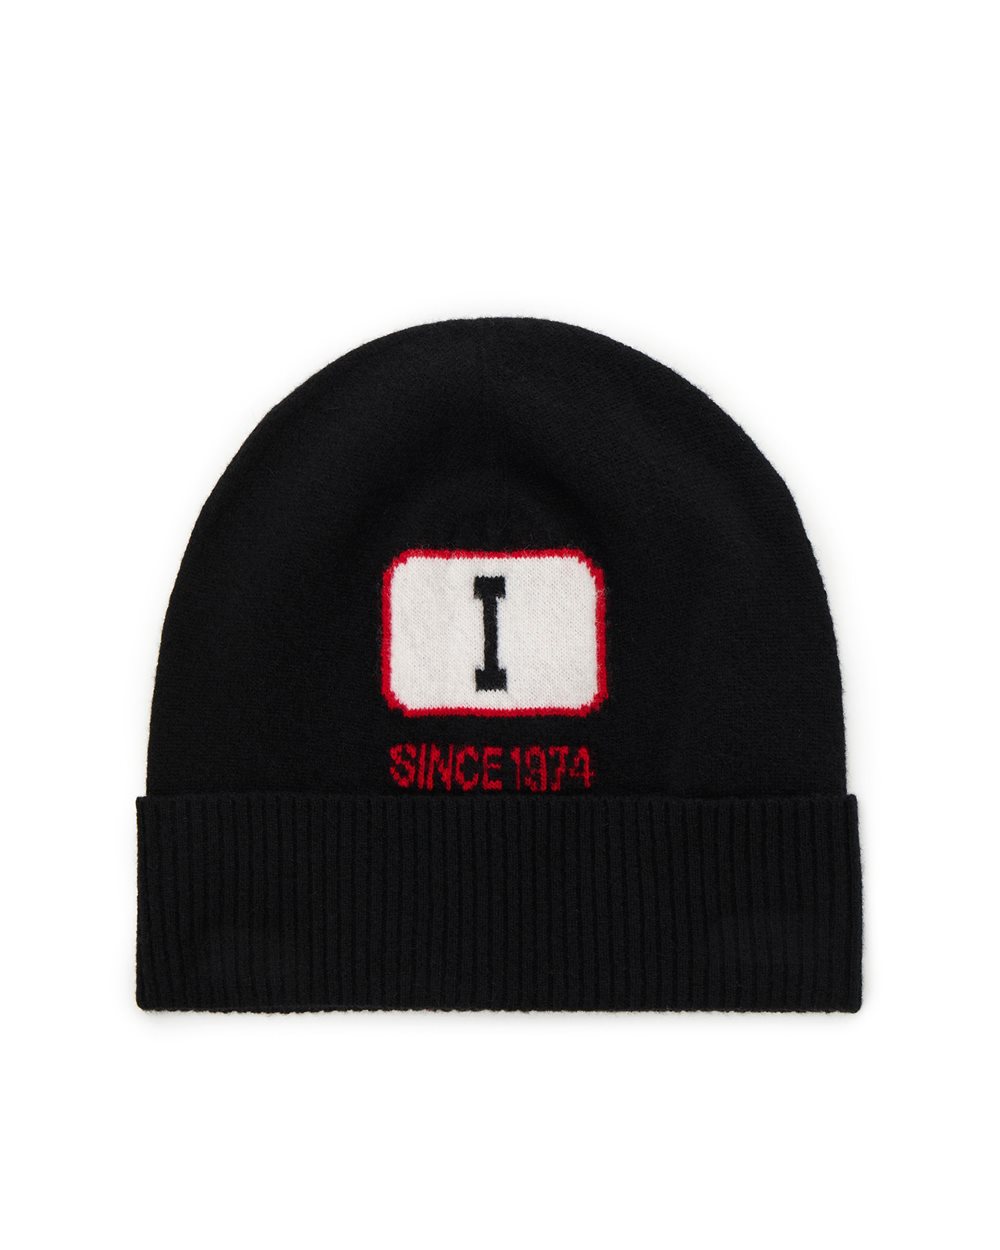 Black wool beanie with logo - ( SECONDO STEP IT ) PROMO SALDI UP TO 40% | Iceberg - Official Website